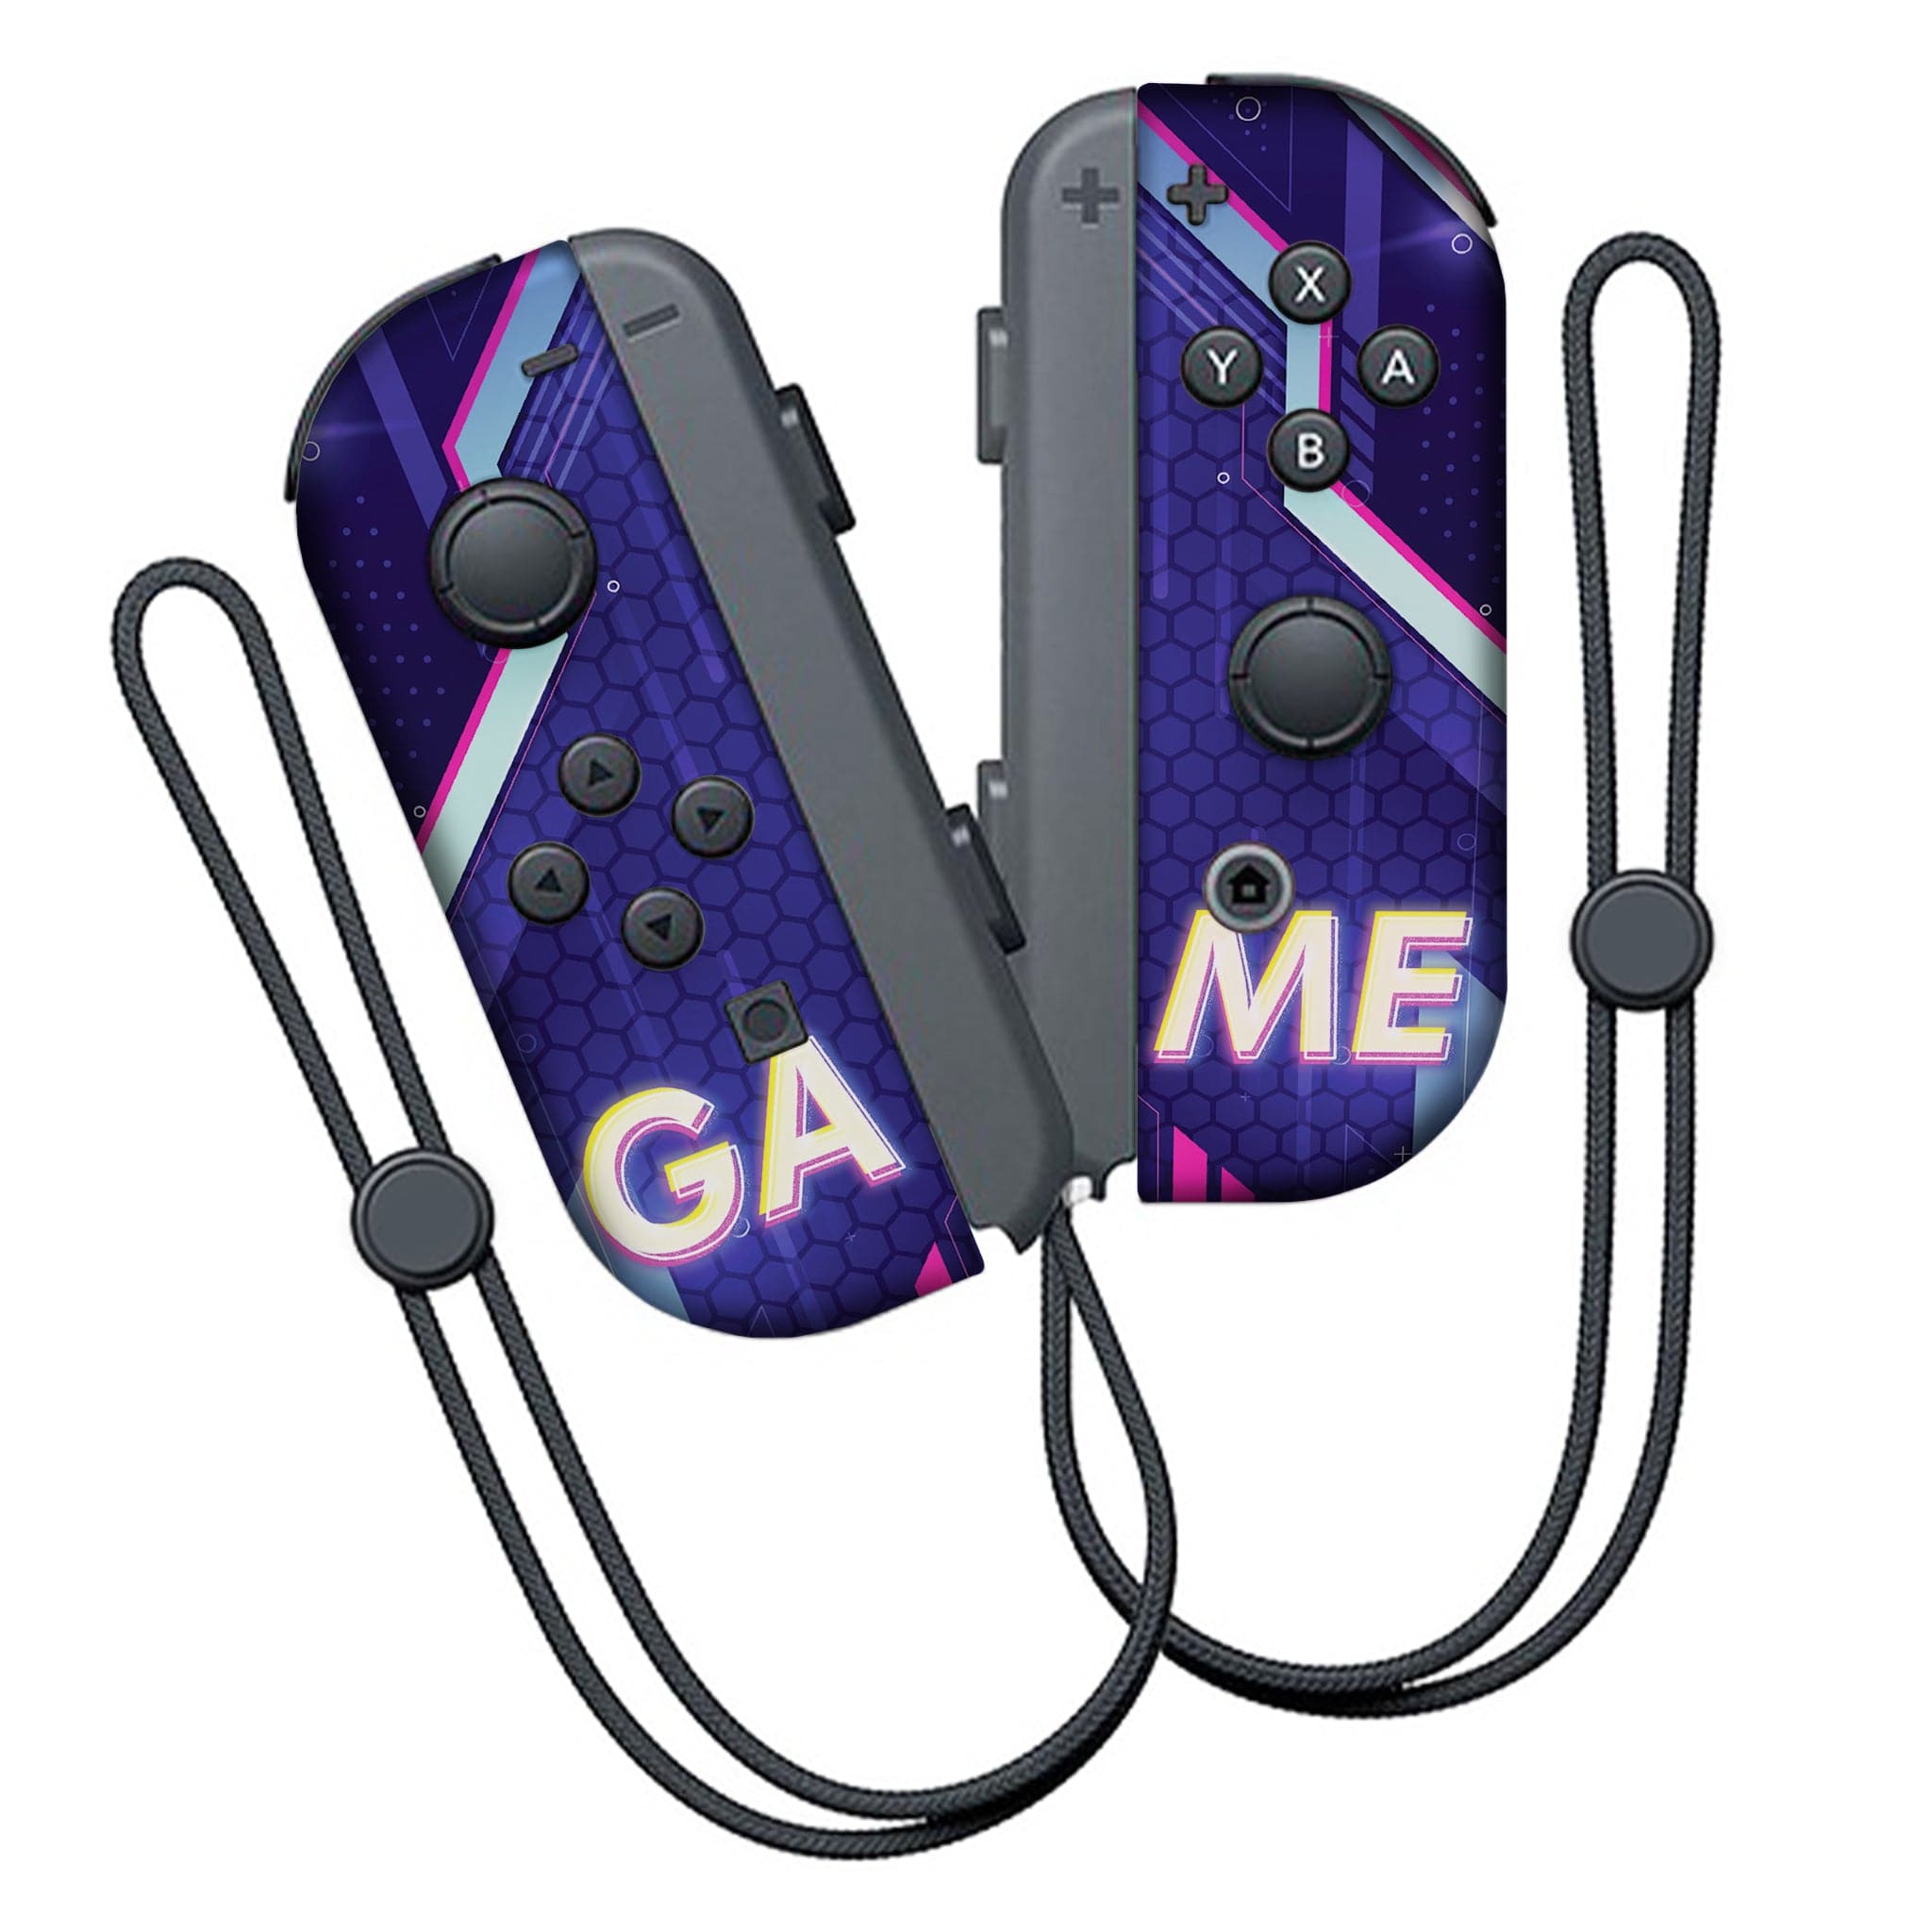 Gamer's Day Inspired Nintendo Switch Joy-Con Left and Right Switch Controllers by Nintendo